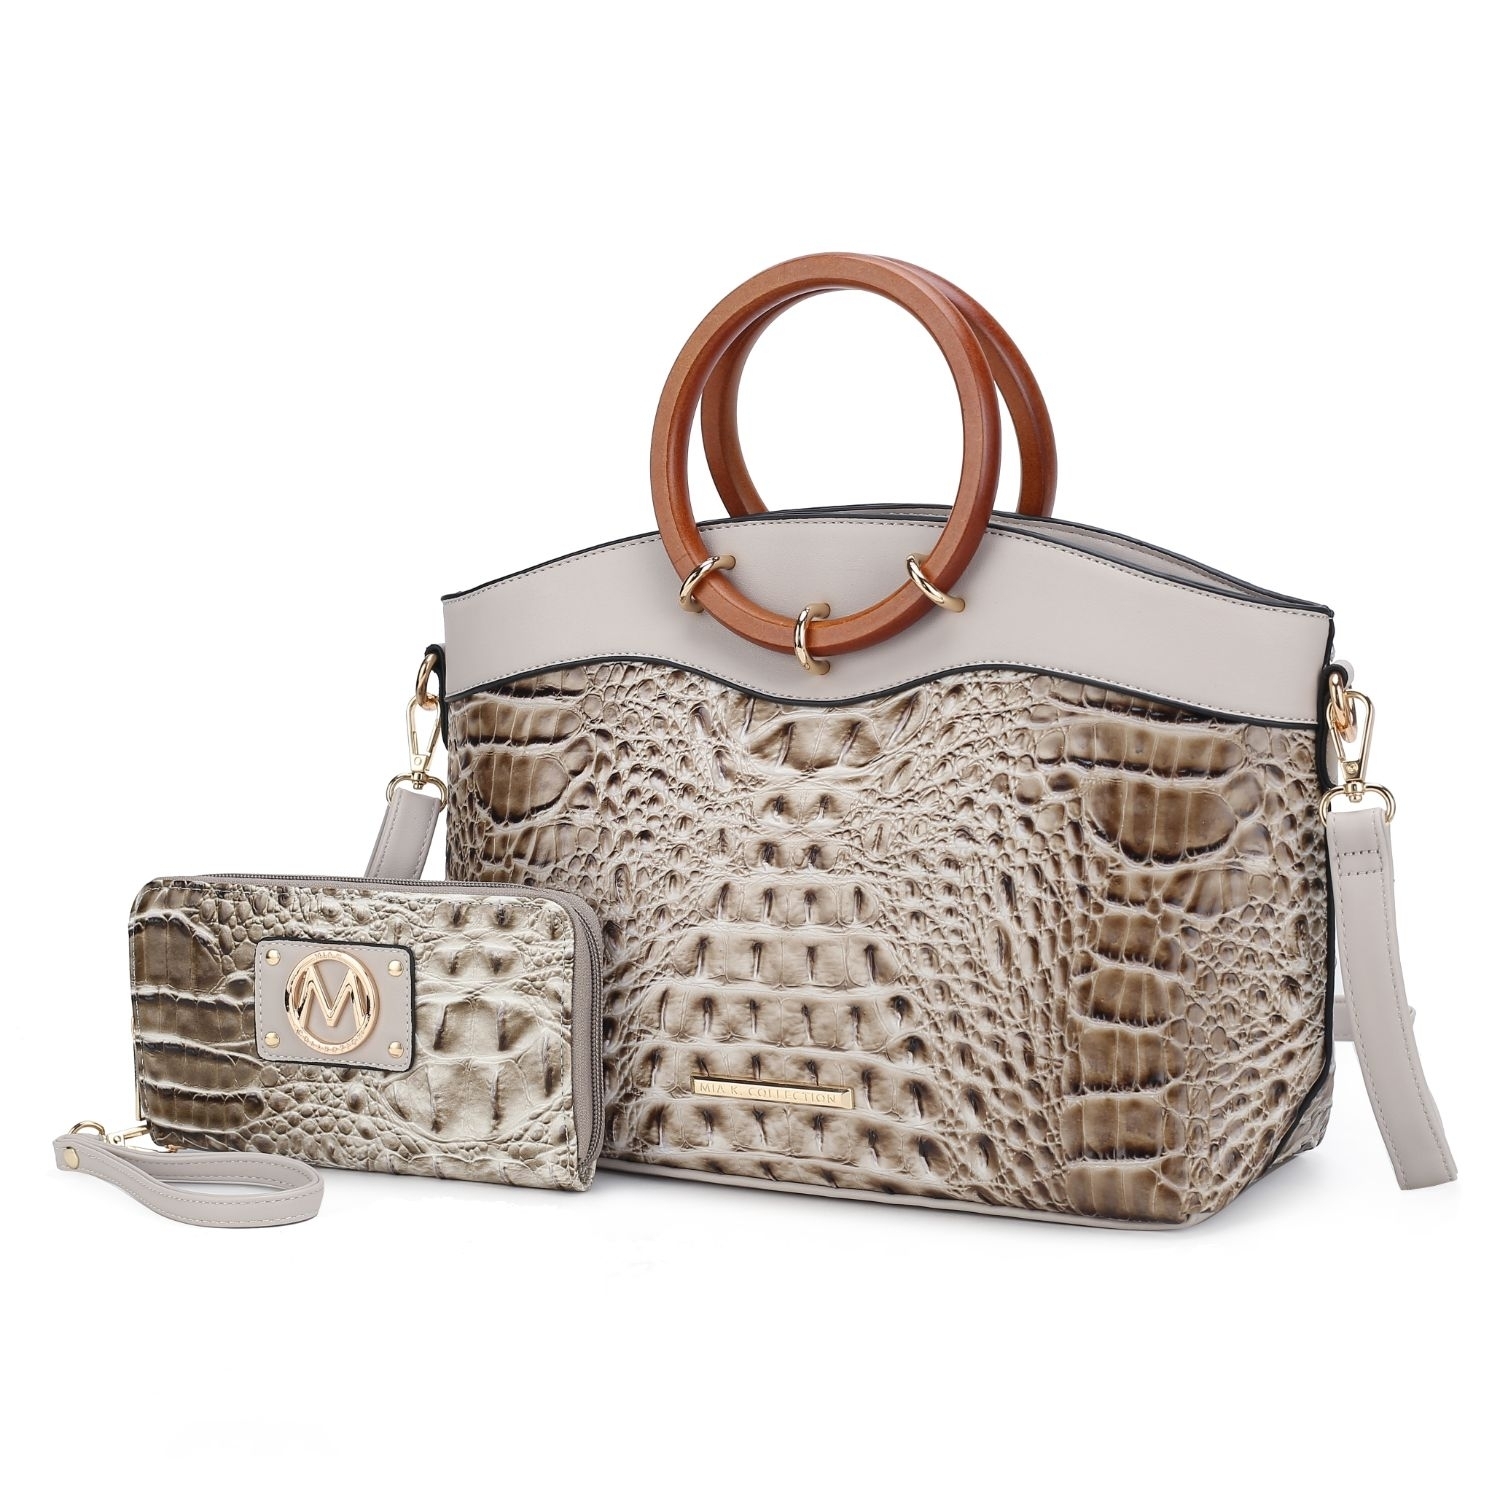 MKF Collection Phoebe Faux Crocodile-Embossed Vegan Leather Women's Tote With Wristlet Wallet Bag - 2 Pieces By Mia K - Light Grey